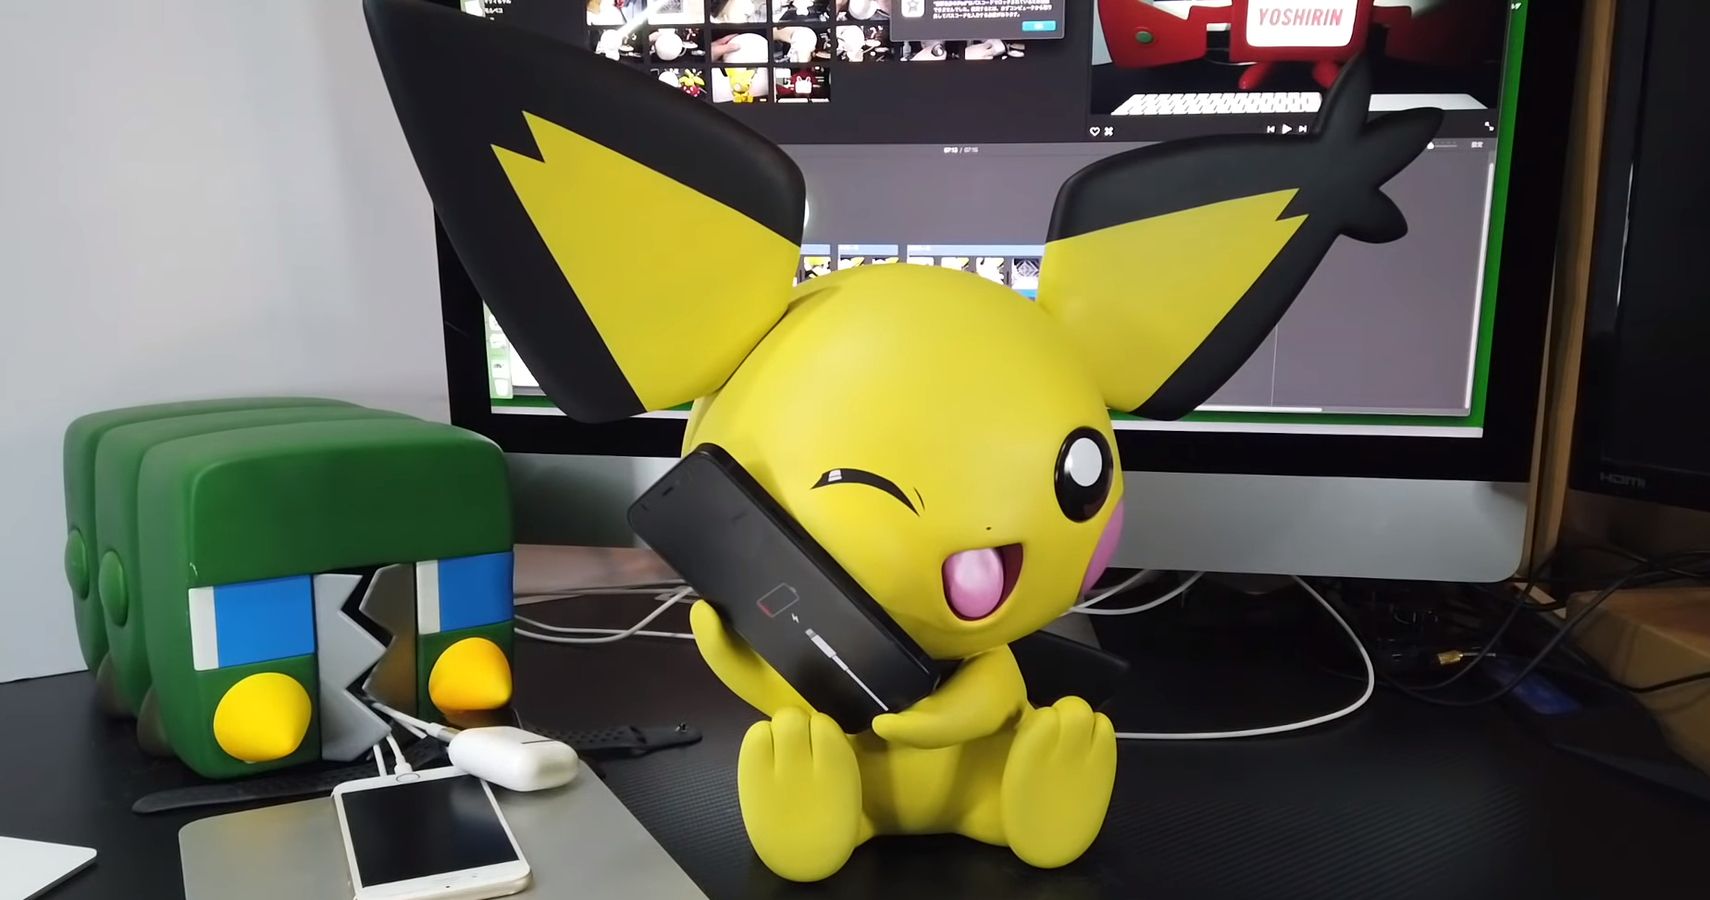 Artist Makes Wireless Charging Cute And Convenient with Pichu MagSafe station ahead of Pokemon anniversary